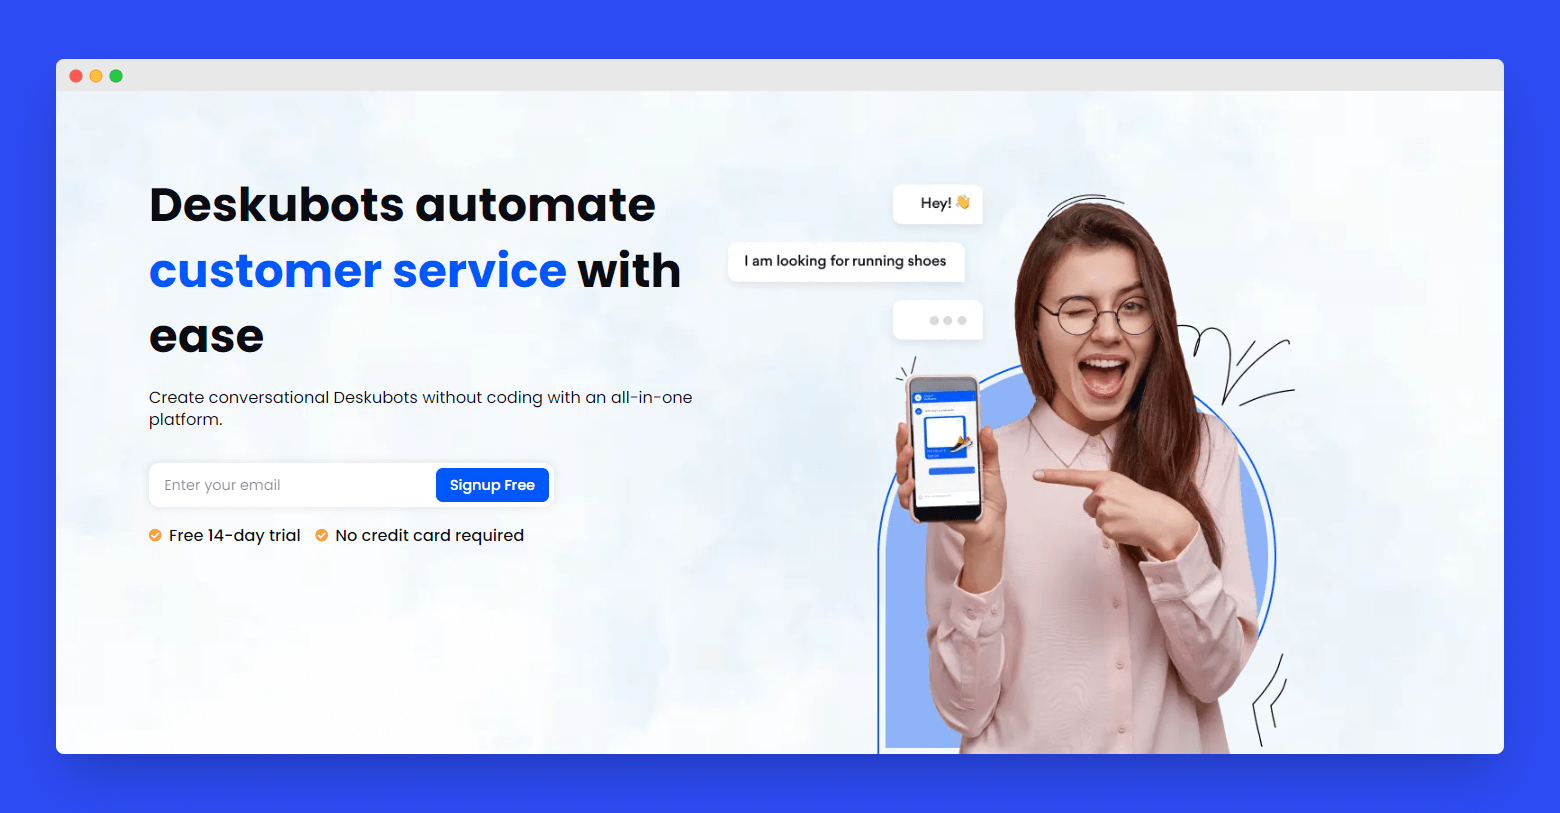 Deskubots automate customer service with ease